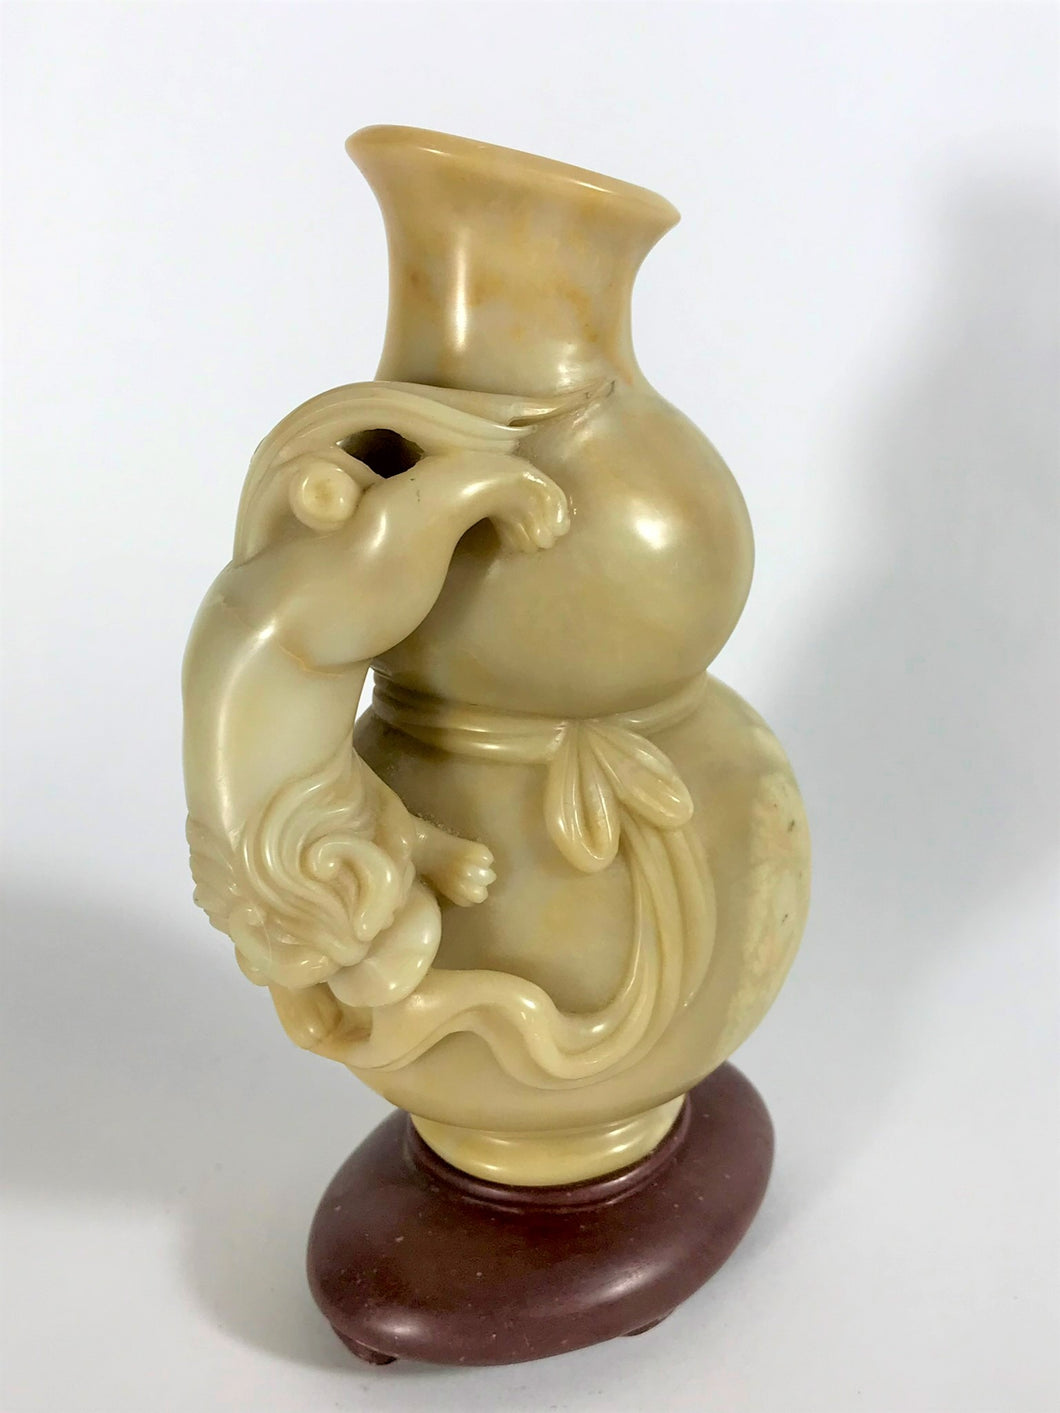 Soapstone:  Soapstone Carving of a Vase with a Mythical Creature